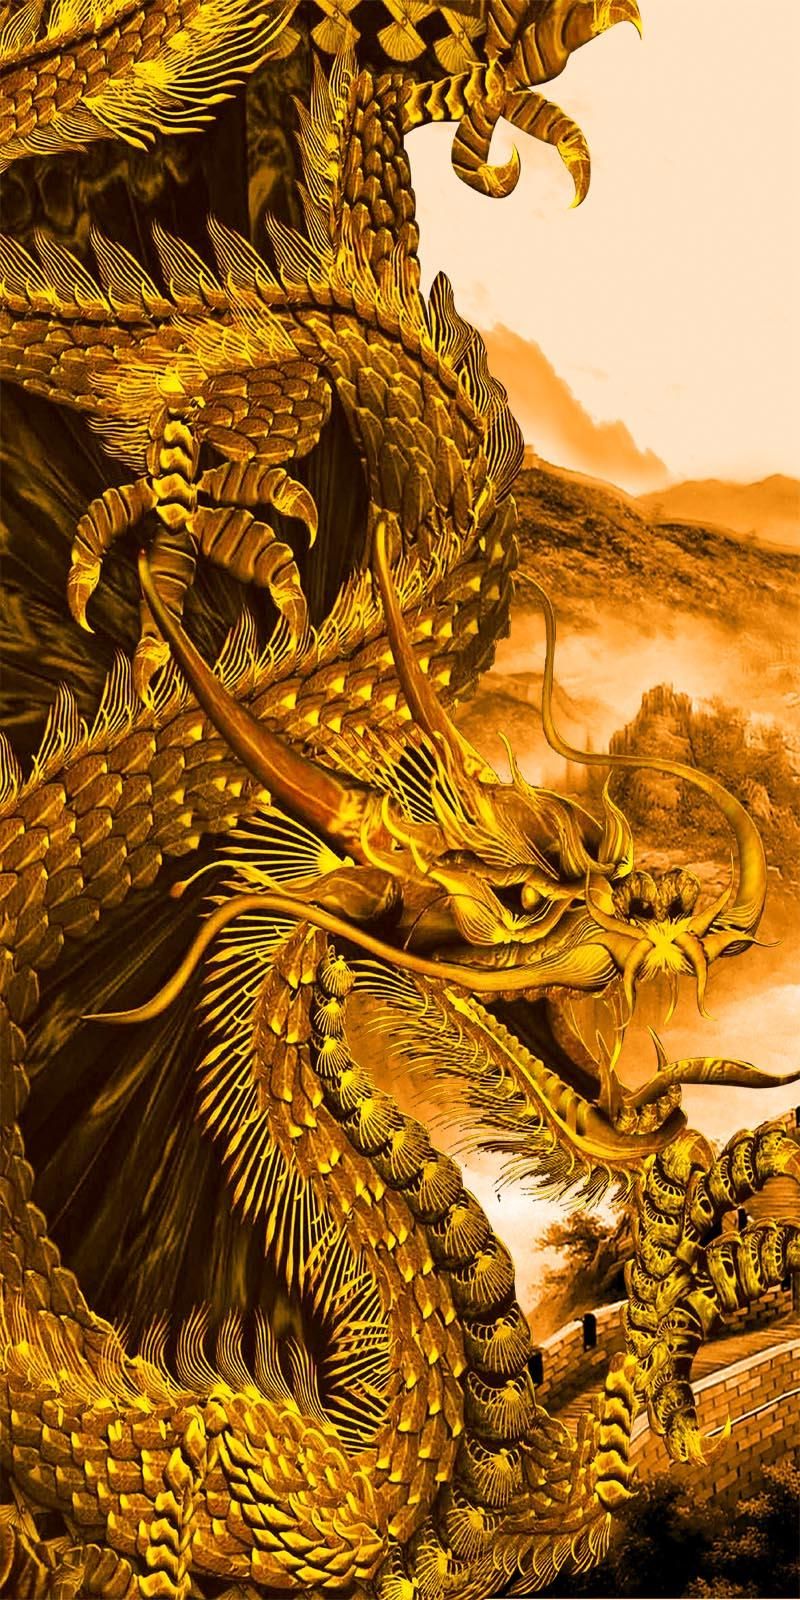 Gold Dragon Wallpapers